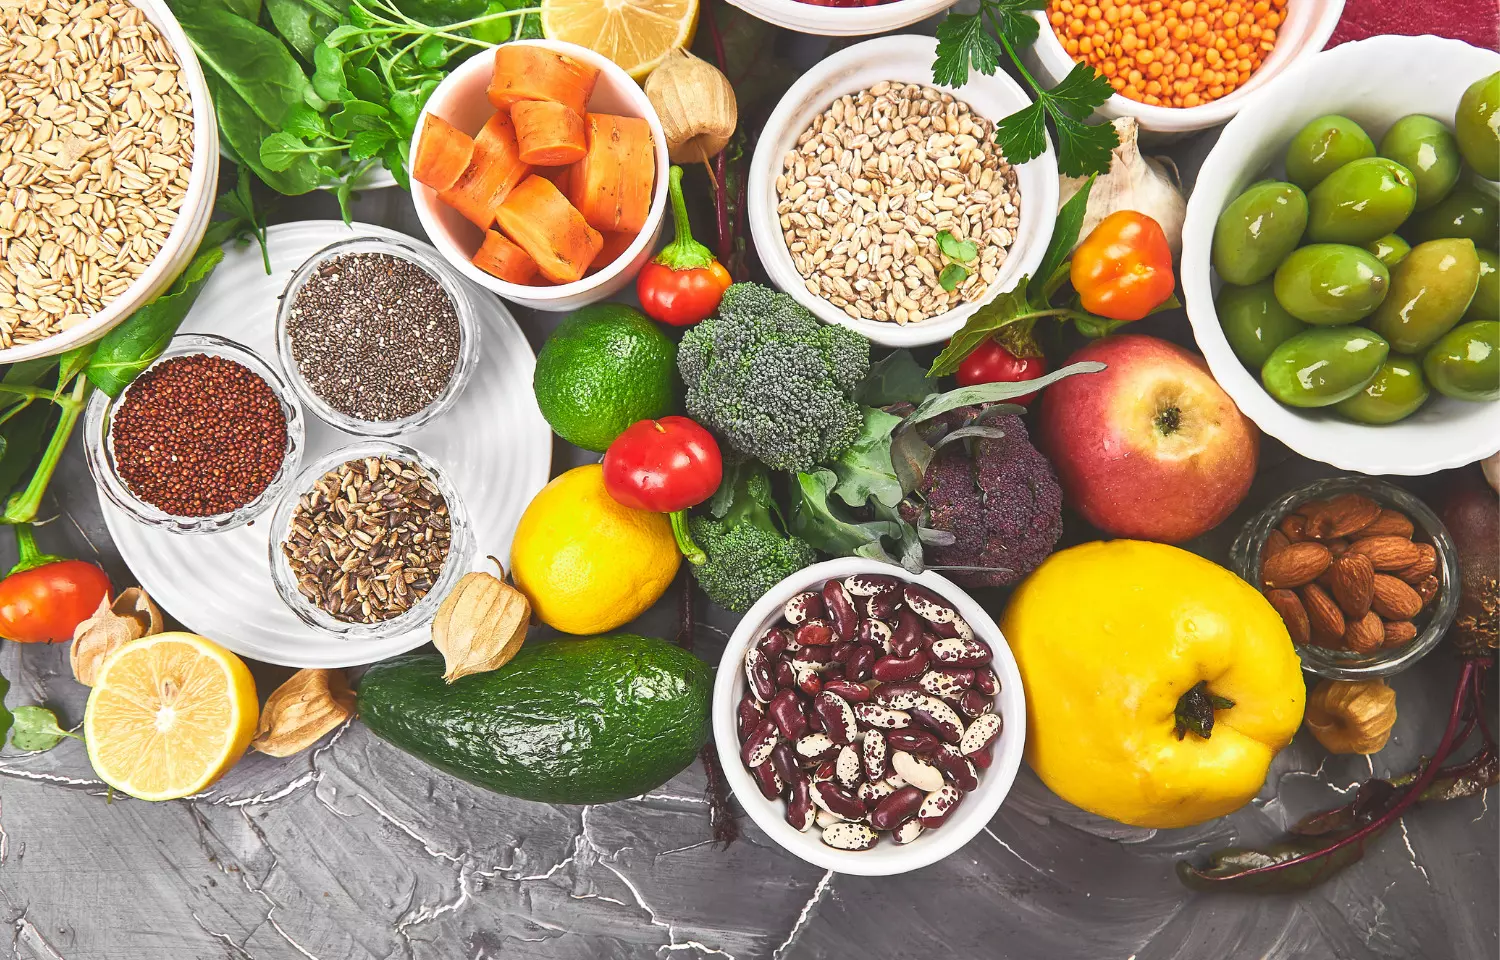 Diets high in fiber associated with less antibiotic resistance in gut bacteria